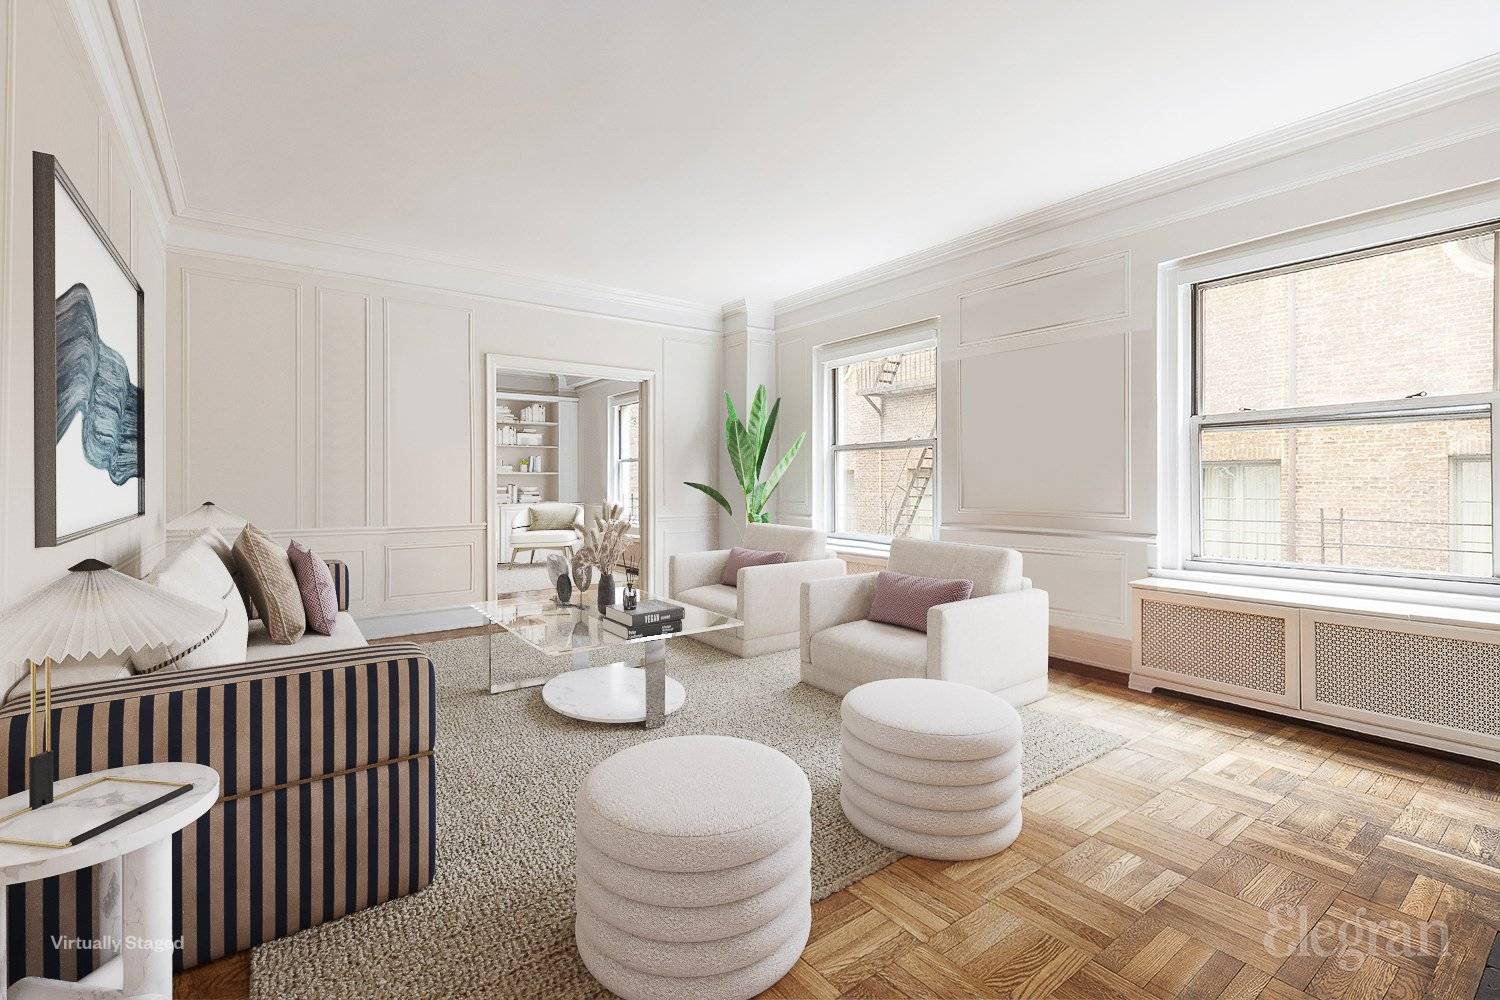 Rarely offered is this opportunity at 8 East 96th street.